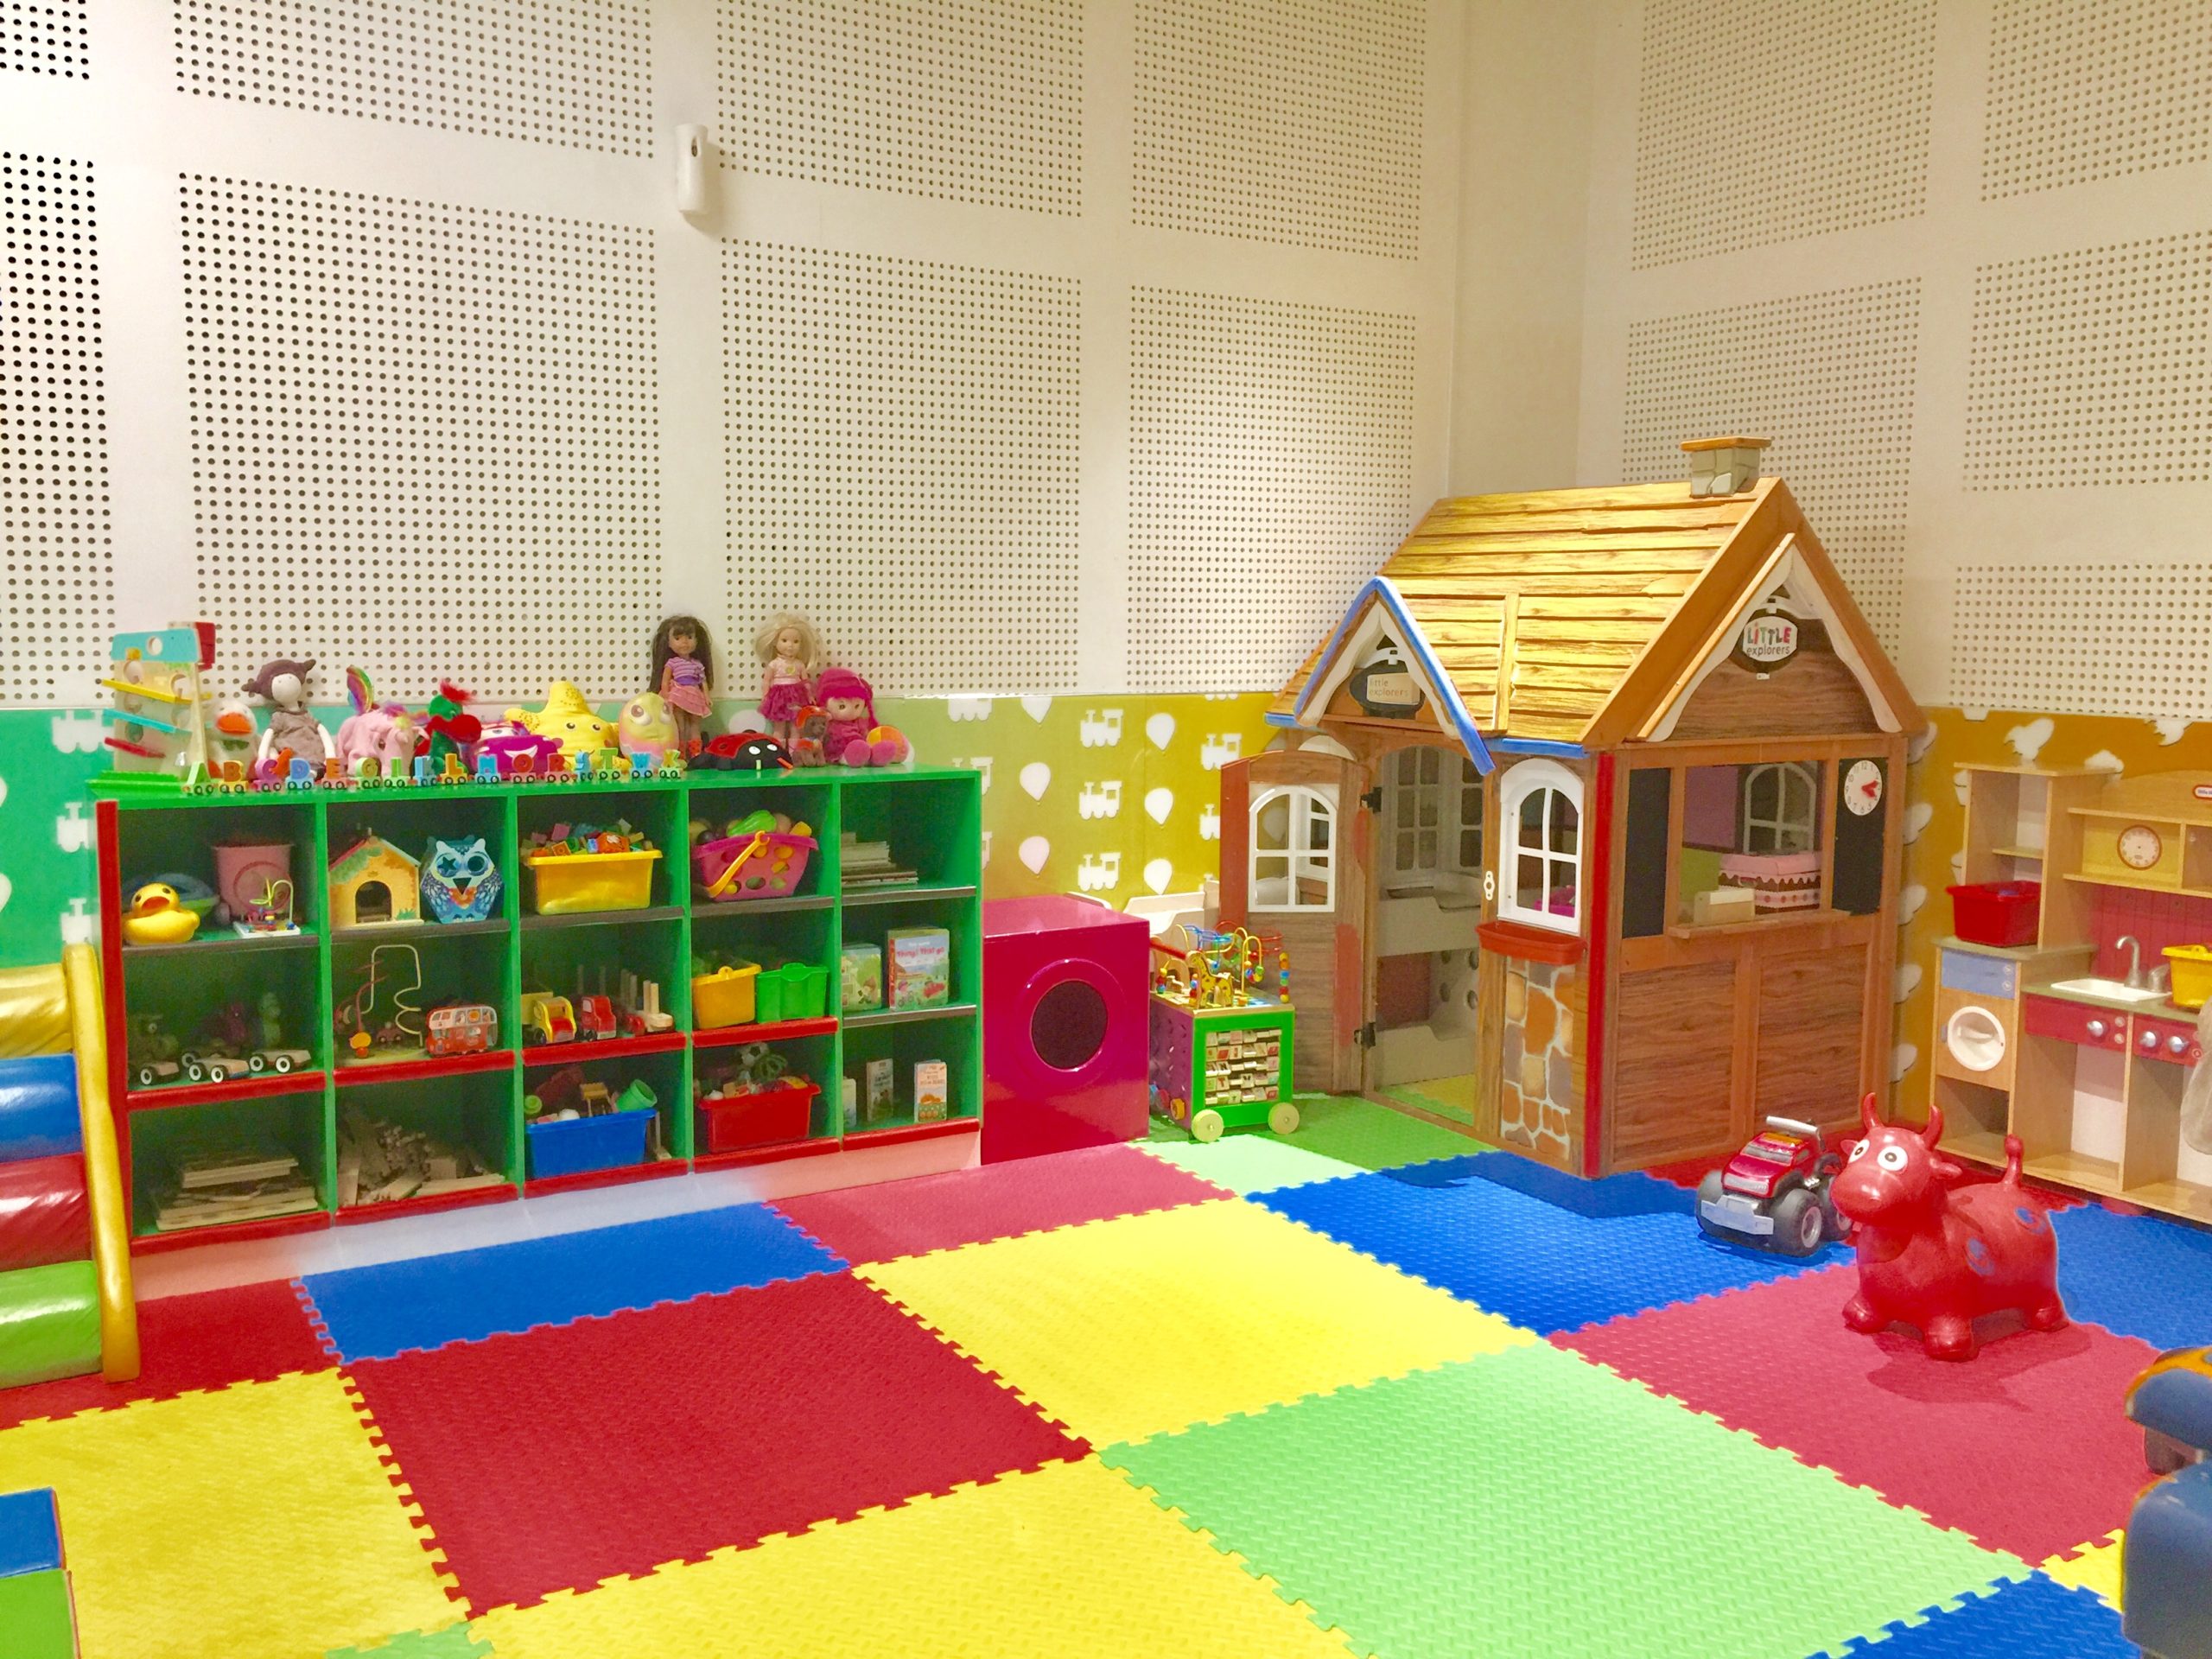 Fun play areas for kids in Dubai: Indoor play